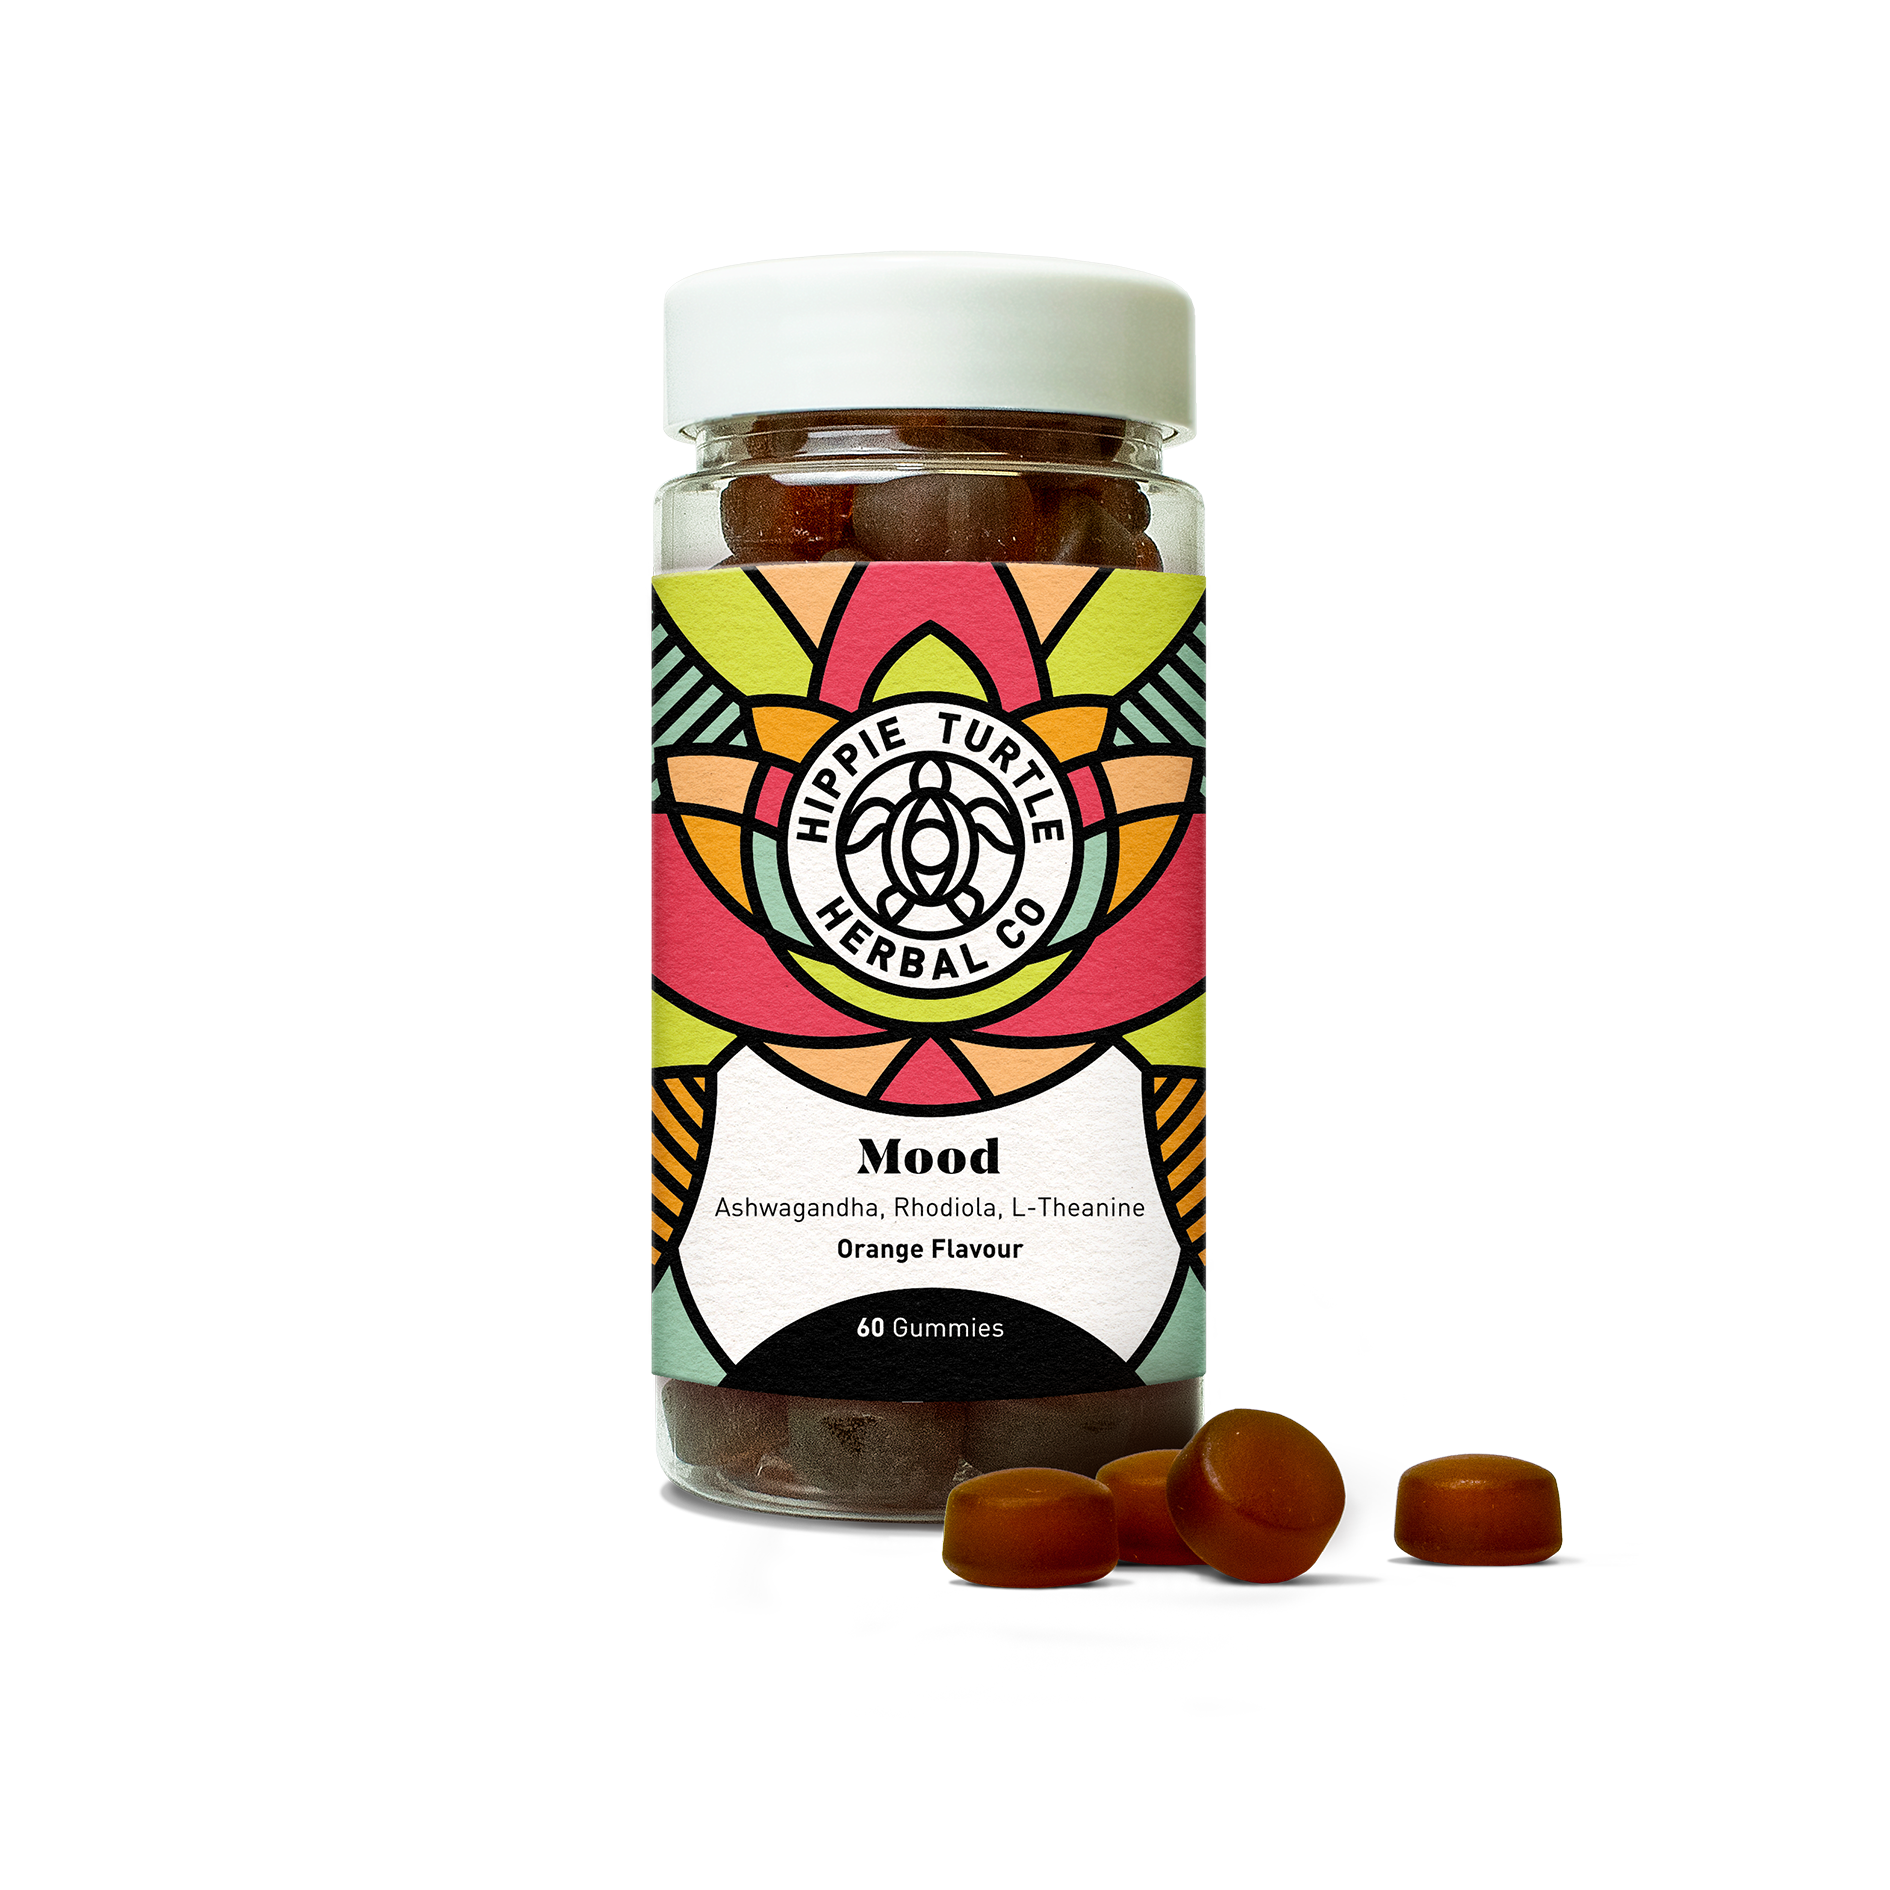 Chewable Ashwagandha supplement with b vitamins to help stress and anxiety